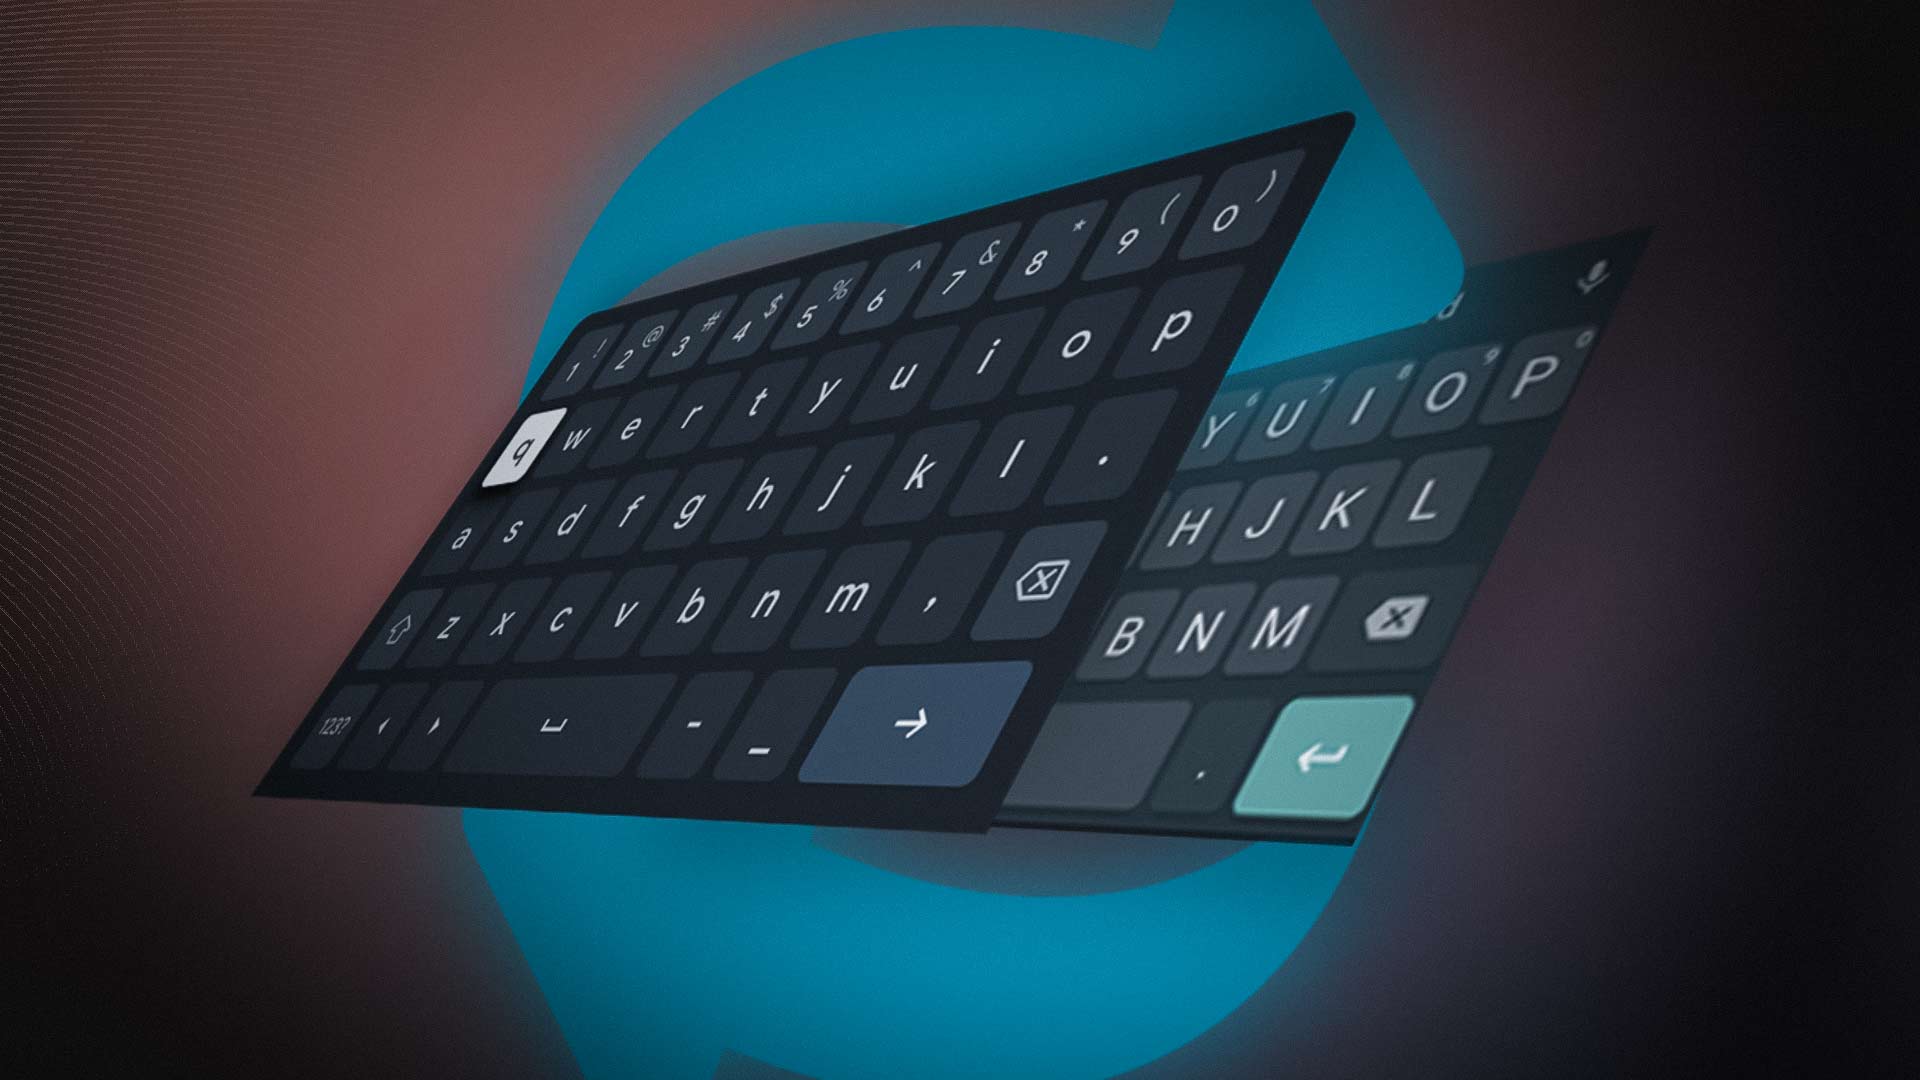 How to Change a Keyboard on Android?